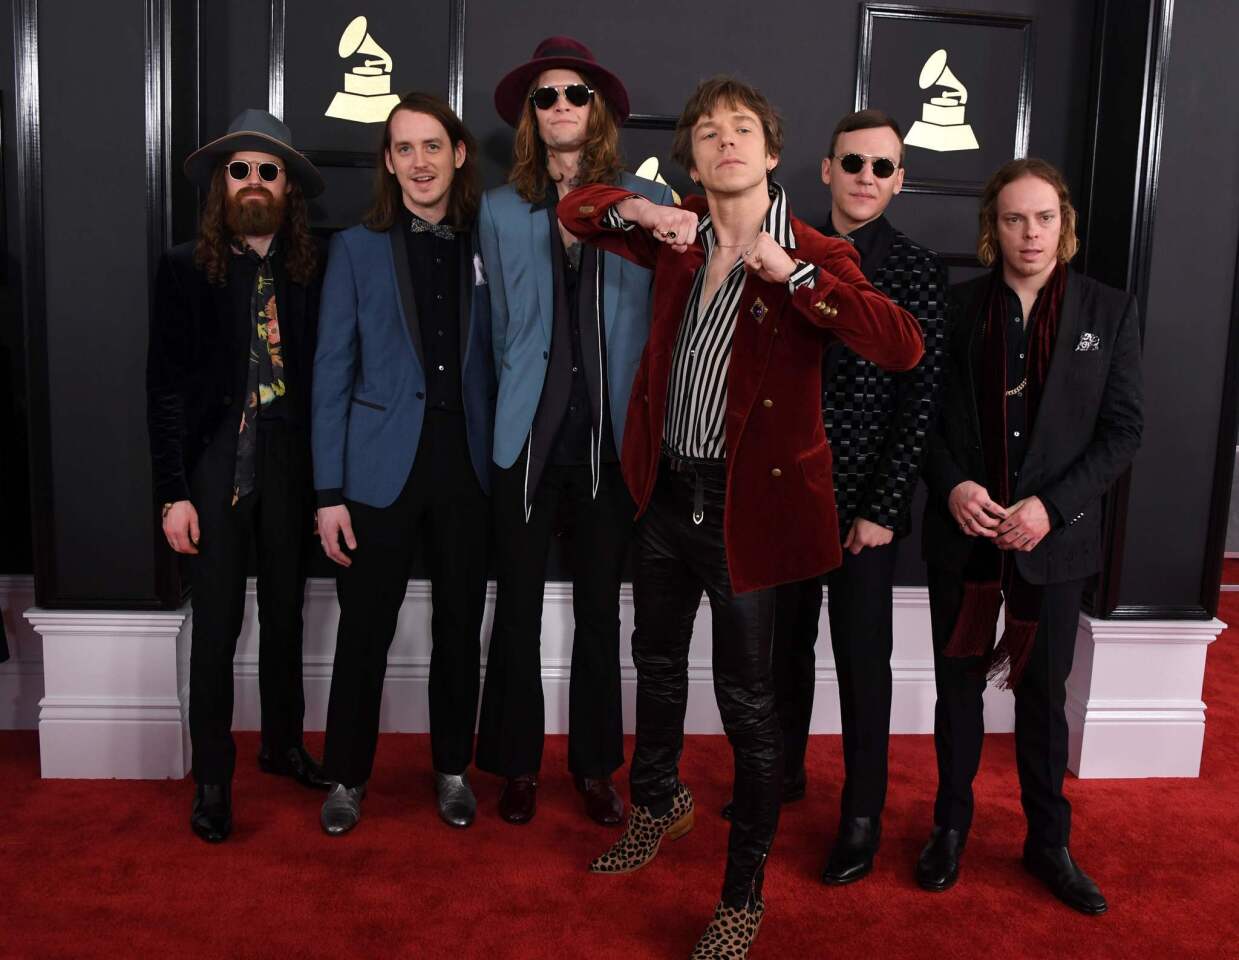 The band Cage the Elephant arrives at the 59th Grammy Awards.